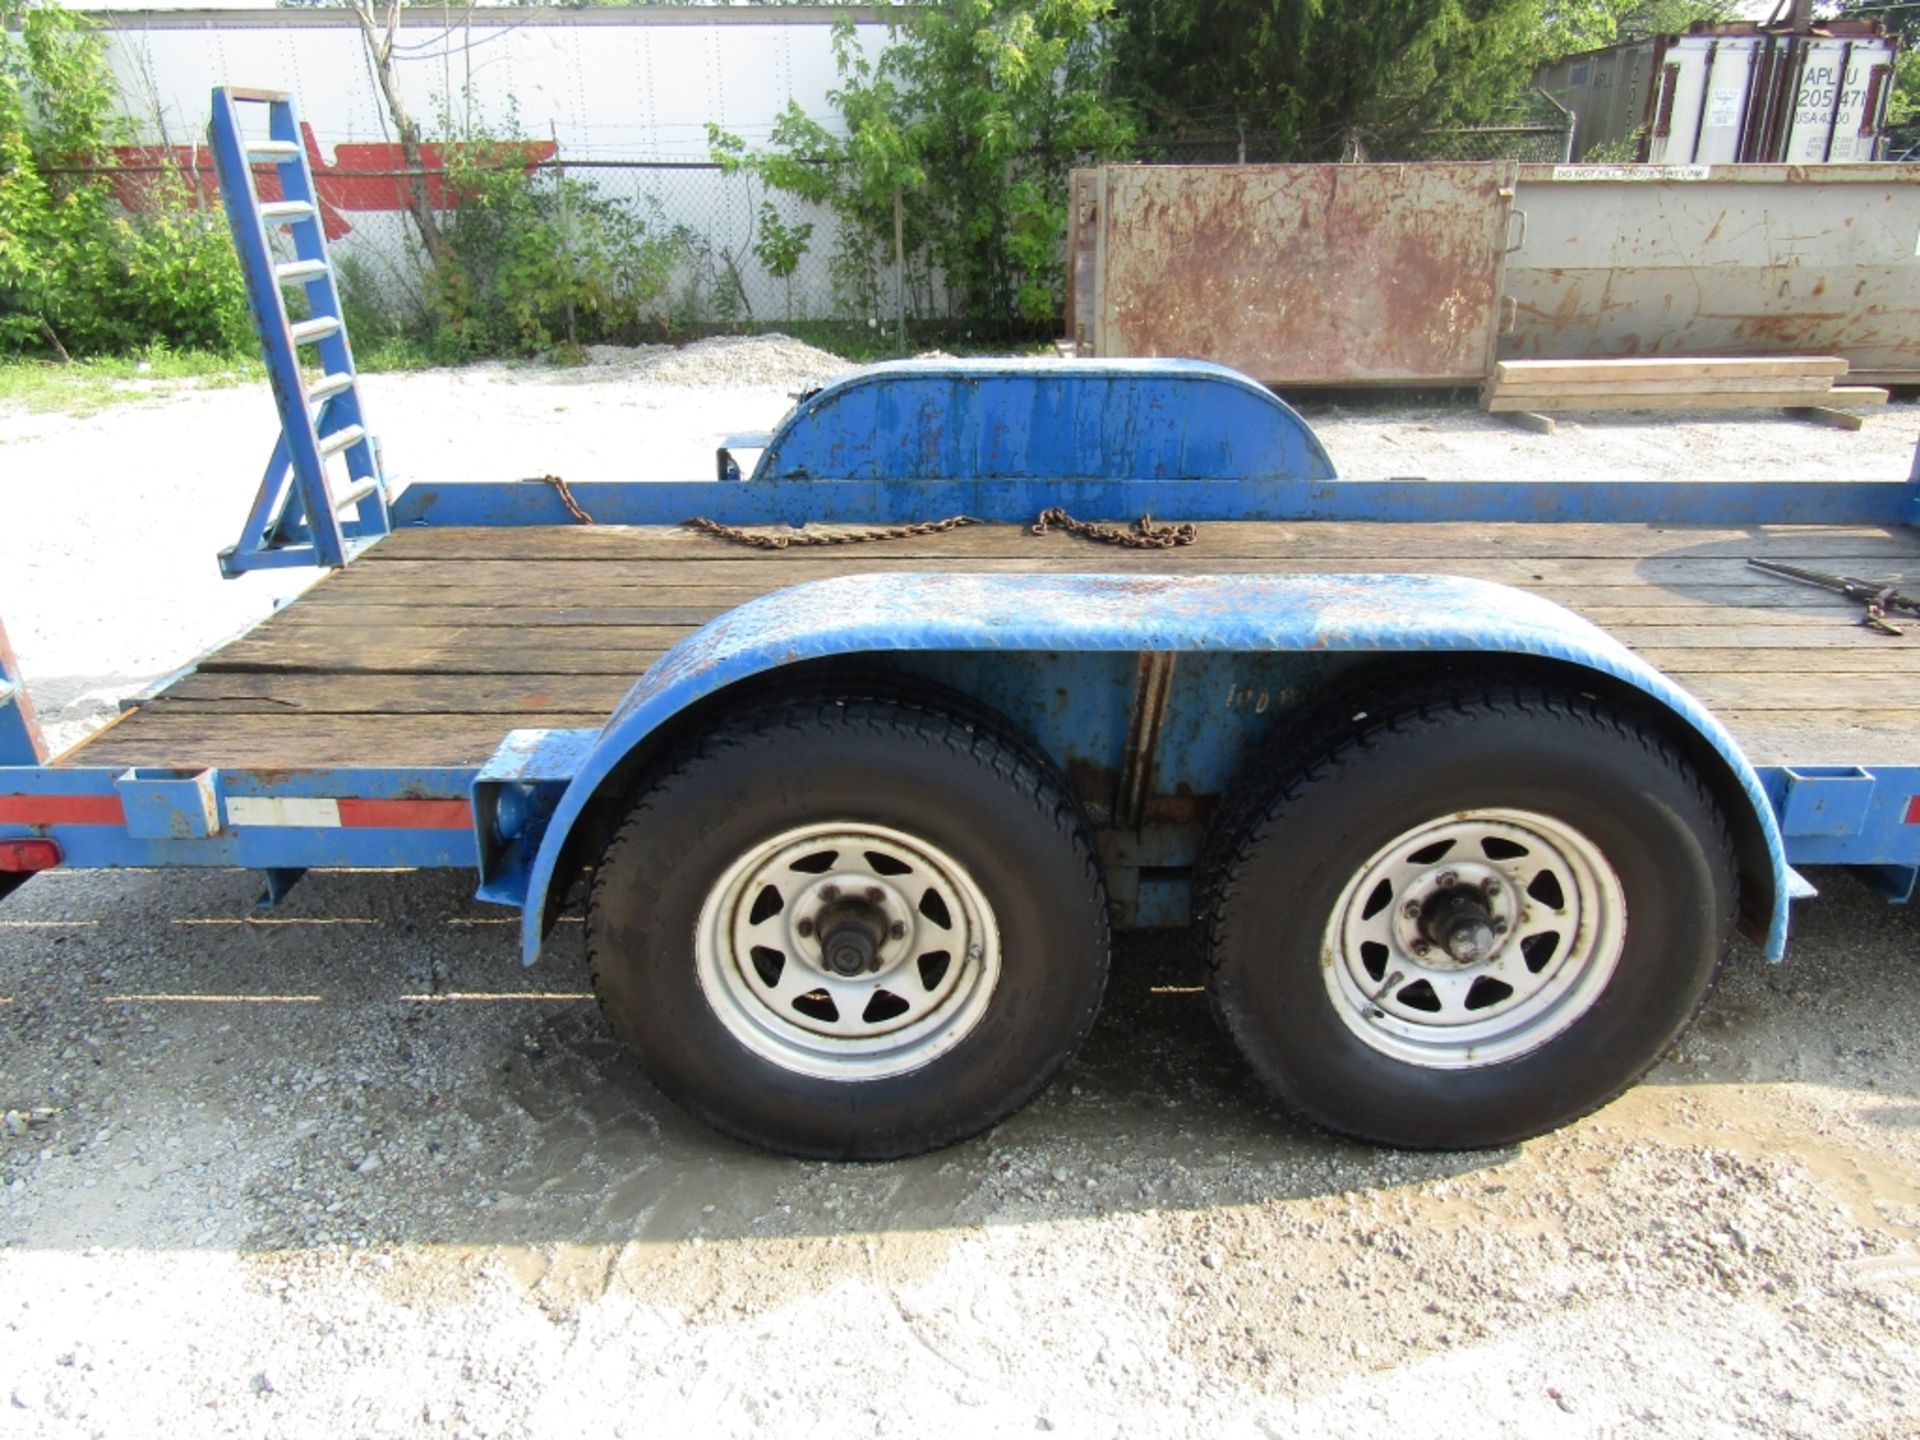 2002 Cronkhite Tandem Axle Trailer, VIN # 47326202621101124, Ramps 16'2" x 6'6", Wood Deck, - Image 8 of 8